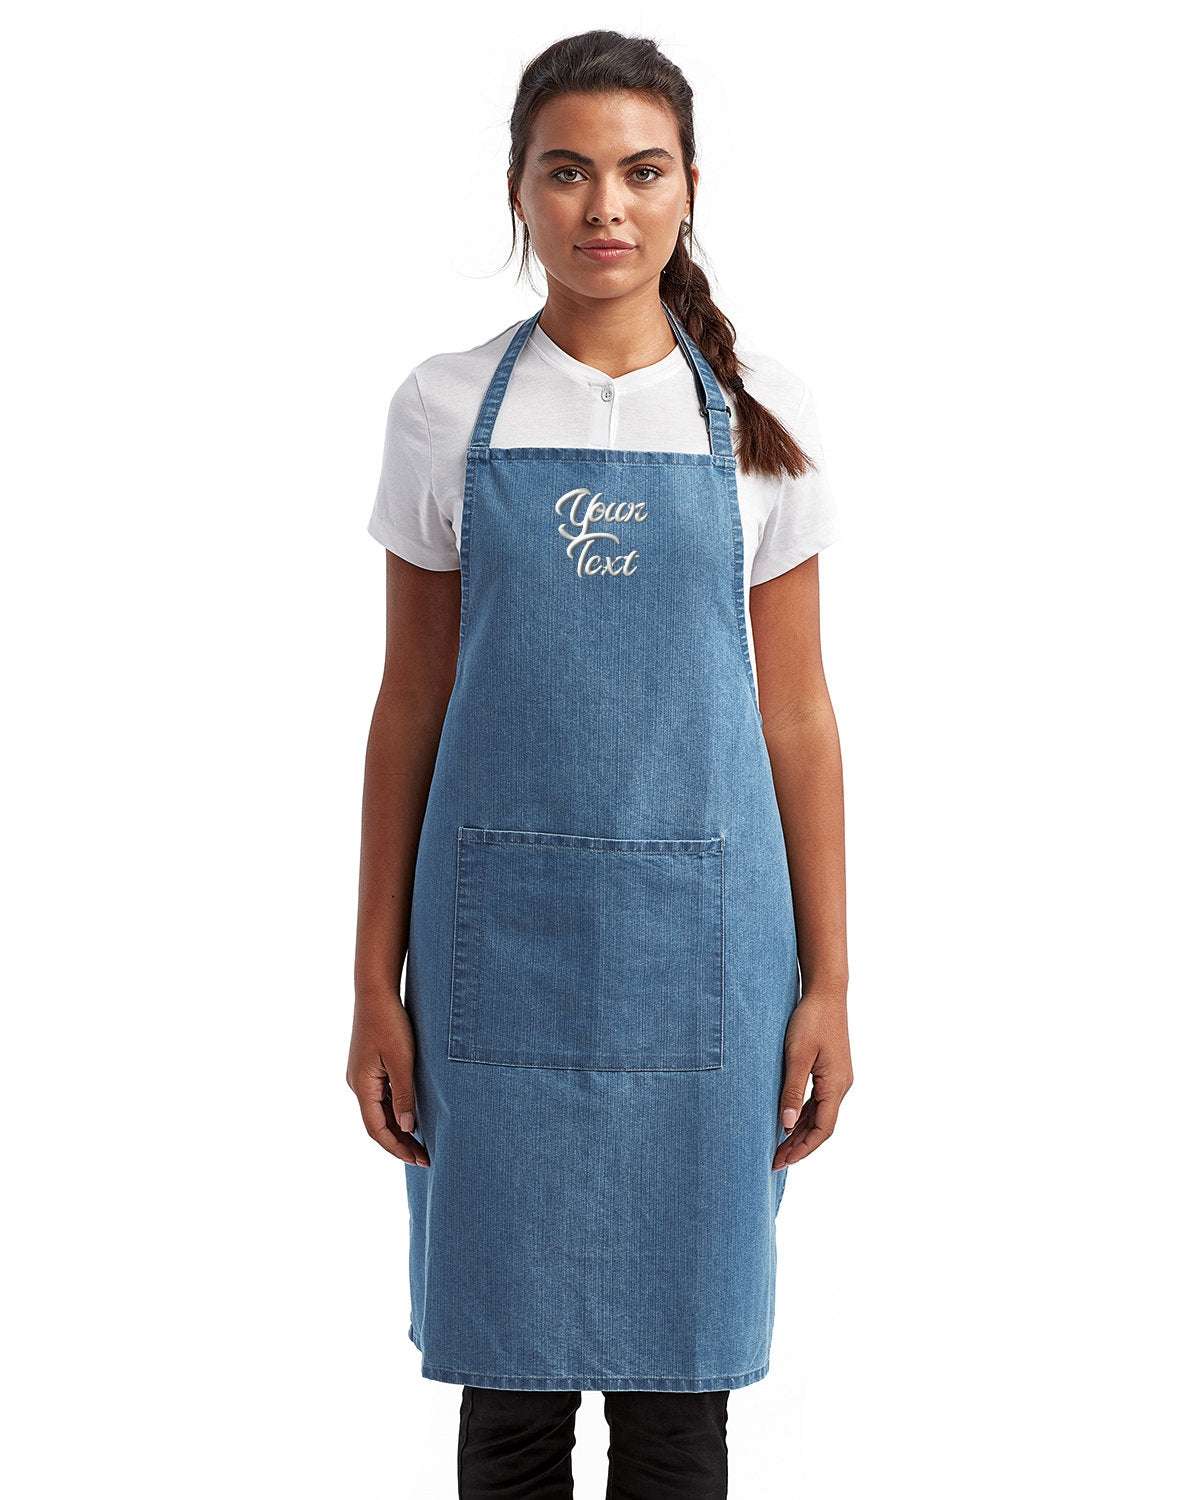 Restaurant Aprons with Your Company Name Embroidered - 3 Packblue denim